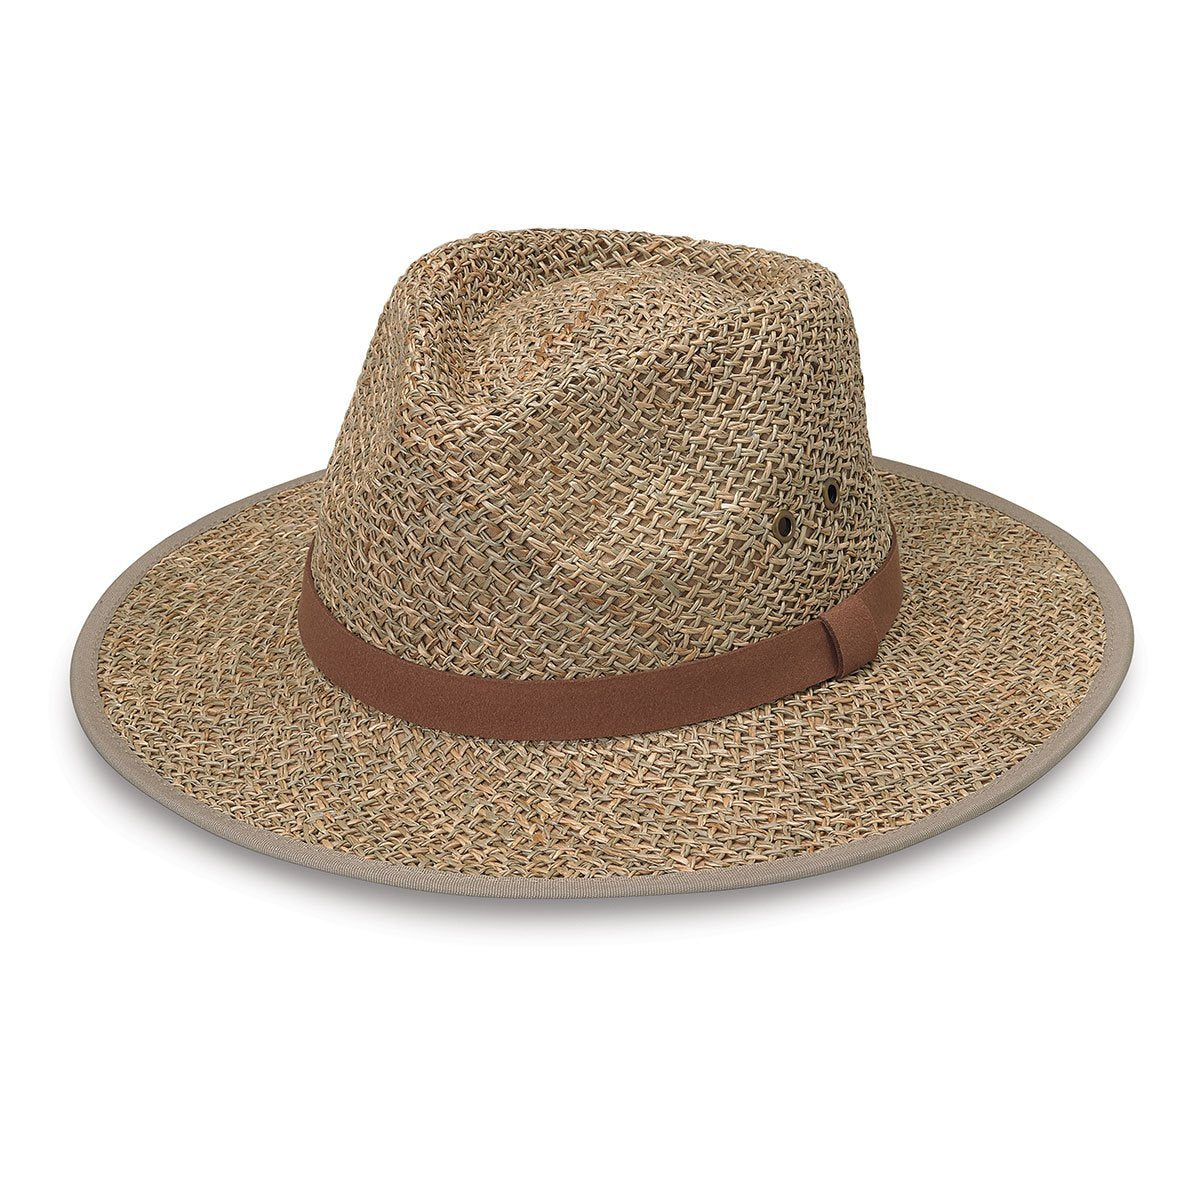 Featuring Charleston UPF Fedora Style Beach Sun Hat with Chinstrap in Natural from Wallaroo